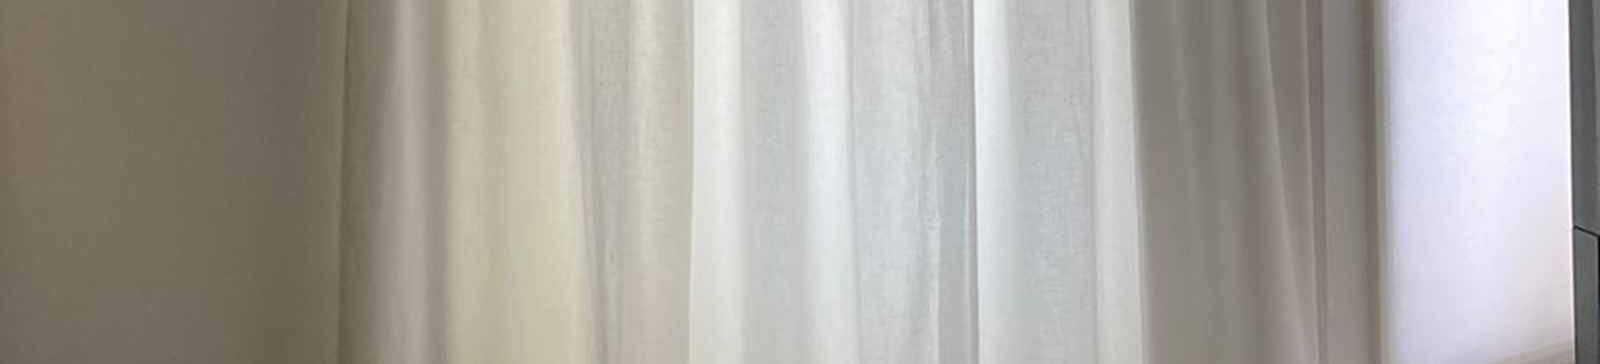 Motorized Curtains and Roller Shades in San Joaquin Hills